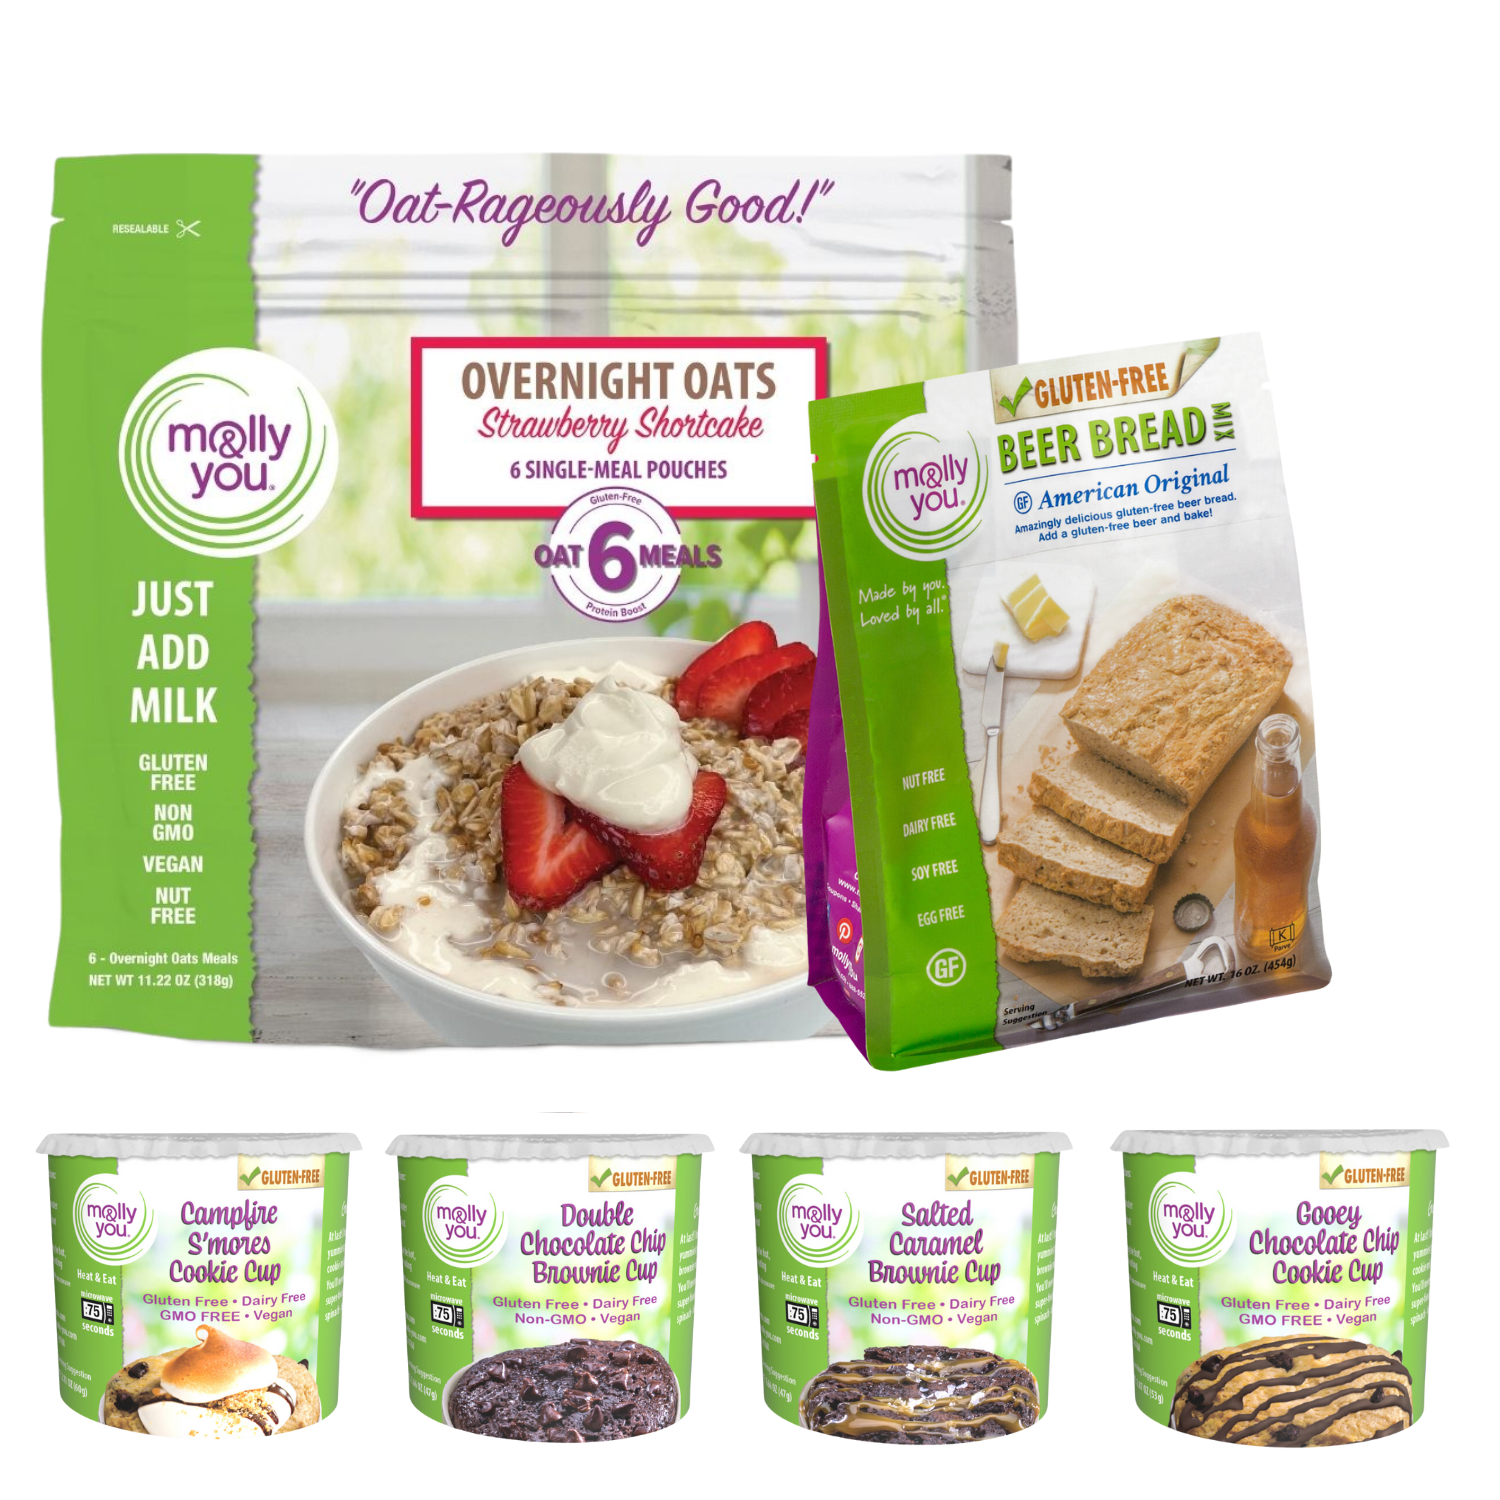 Ultimate Gluten-Free Bundle includes 1 -6 pack of Strawberry Shortcake Overnight oats, 1 Gluten-Free American Original Beer Bread Mix, 1 of the following dessert cups (Campfire S'mores Cookie, Double Chocolate Chip Brownie, Salted Caramel Brownie, and Gooey Chocolate Chip Cookie) 